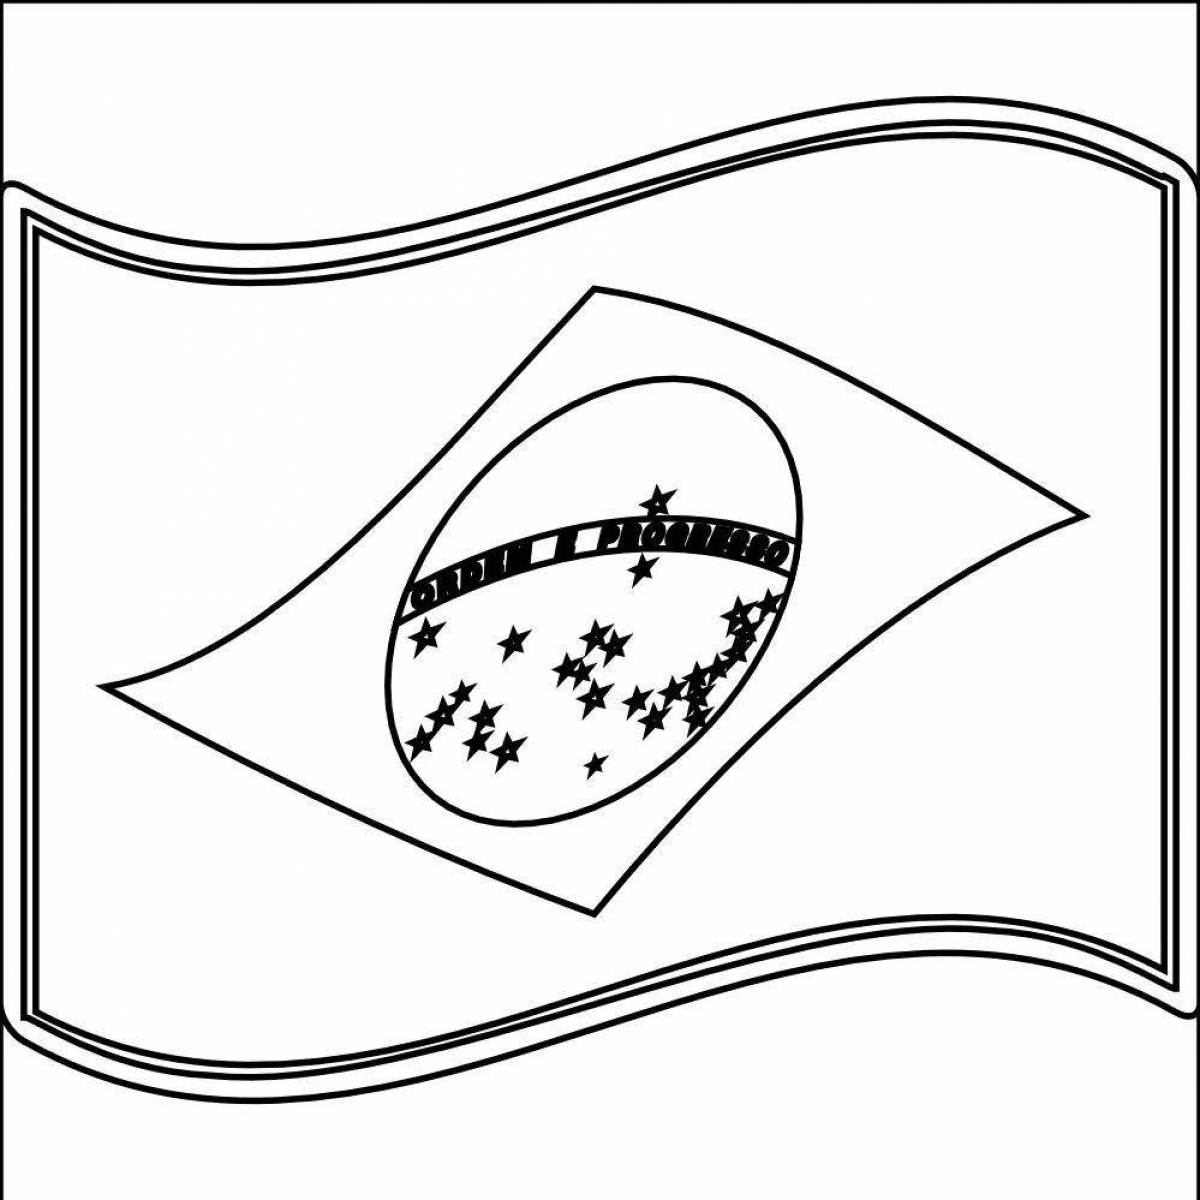 Brazil bold flag coloring page